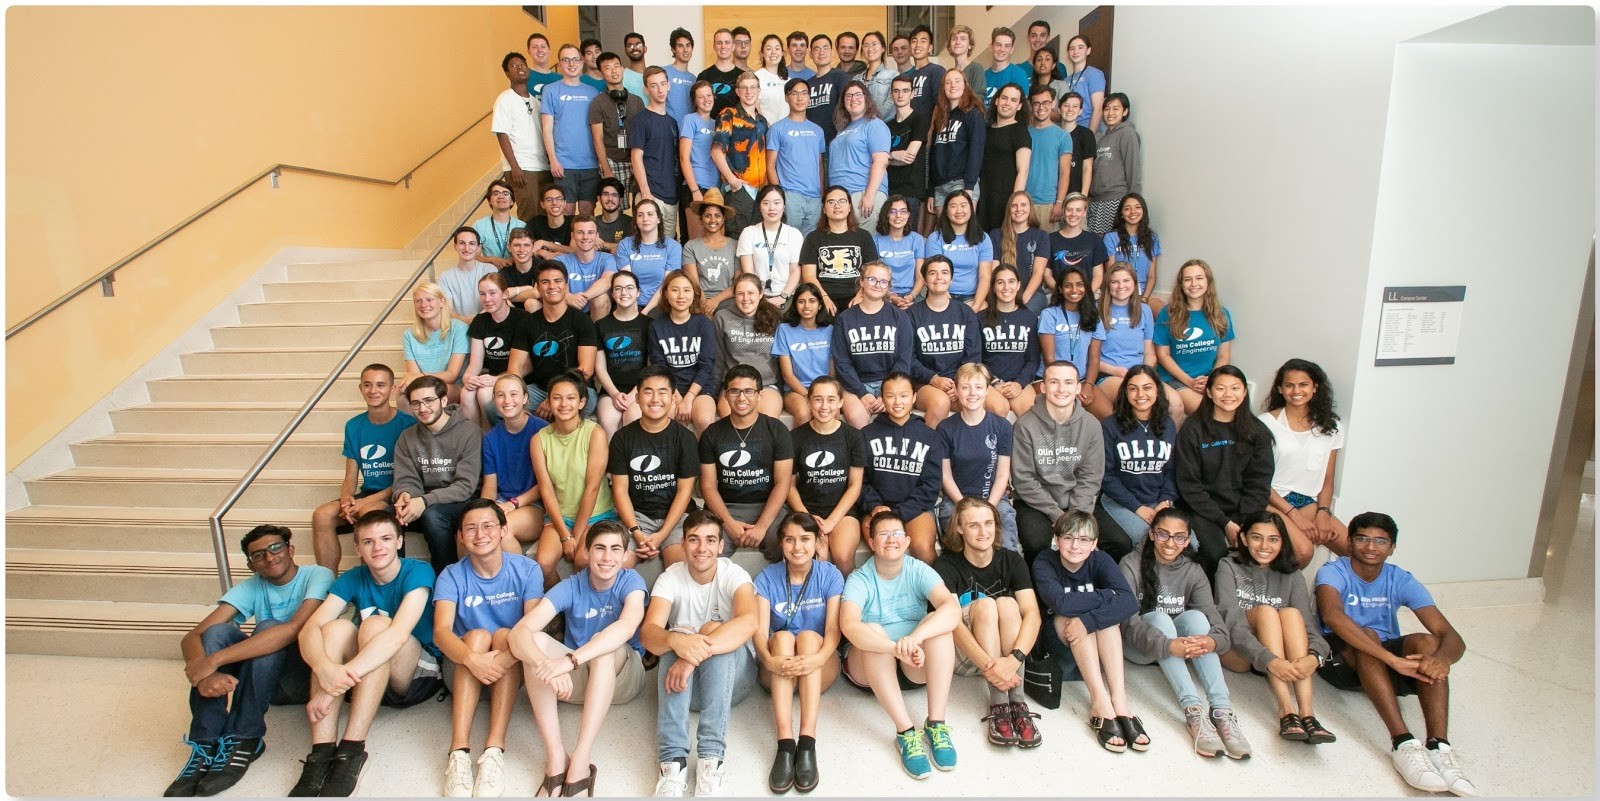 A group picture of a bunch of students, many of whom are wearing Olin shirts.